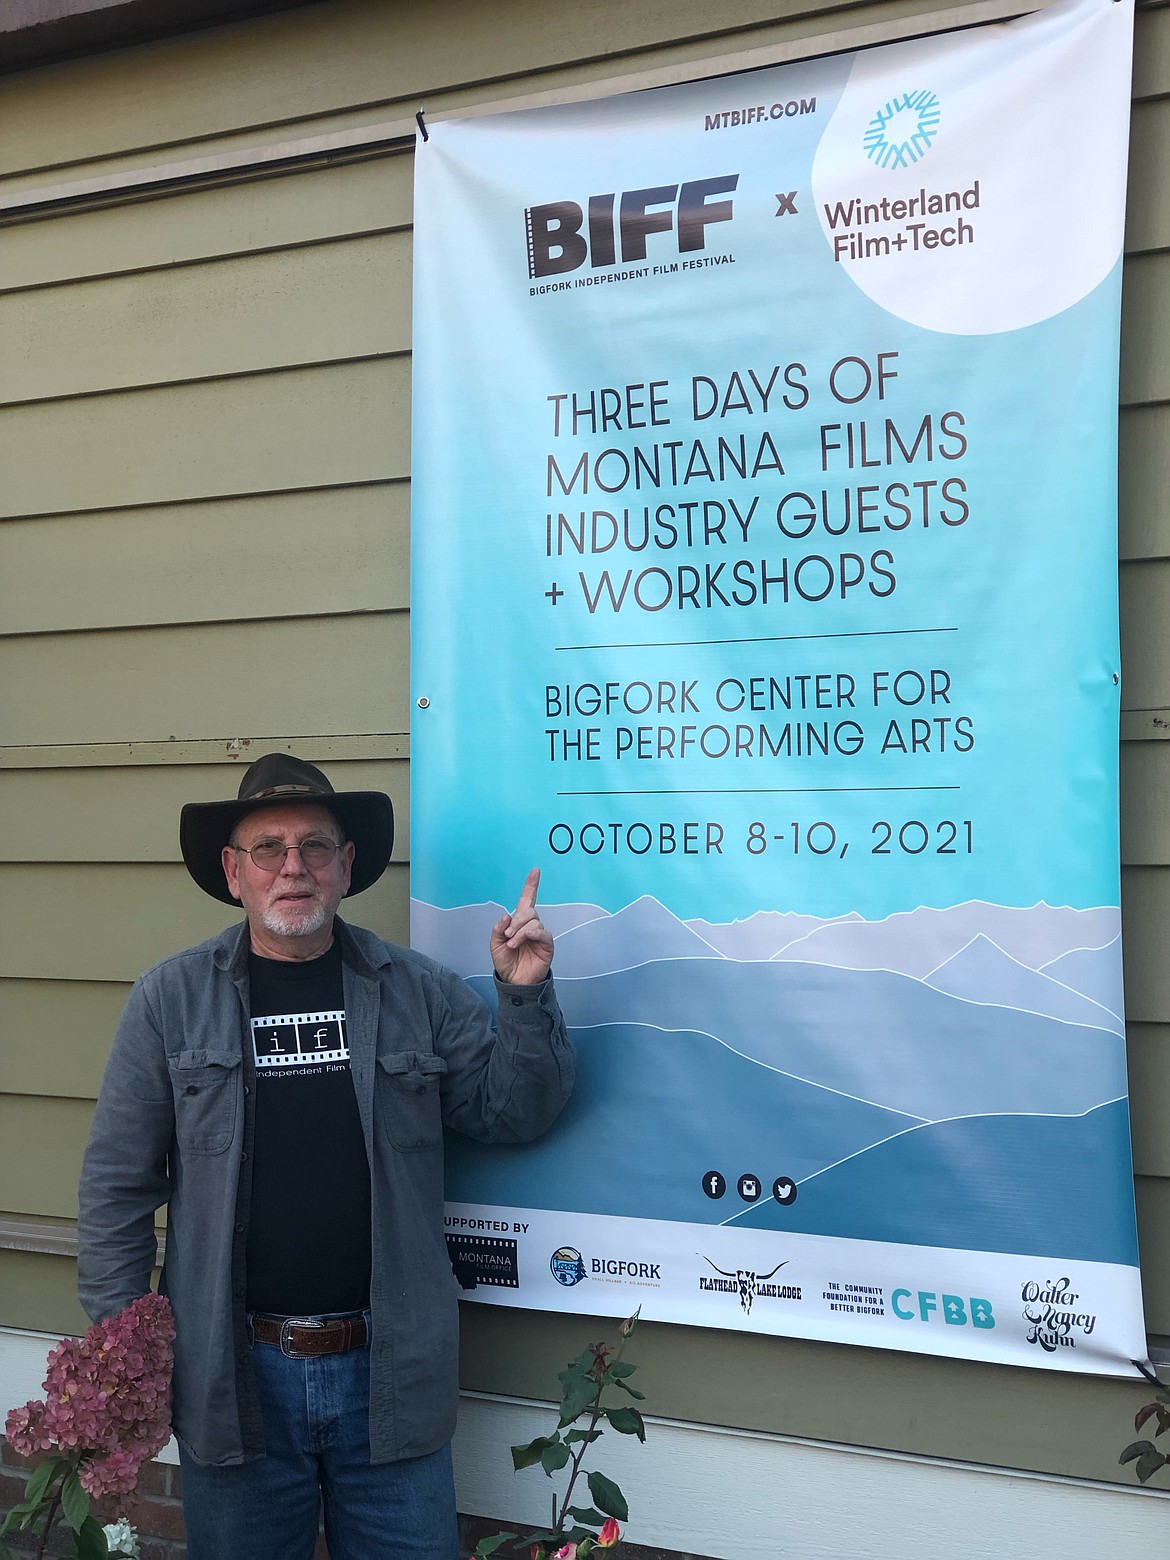 Steve Shapero, Founder and Executive Director of the Bigfork Independent Film Festival, stands beside the Bigfork Center for the Performing Arts, where the festival will take place. (photo provided)